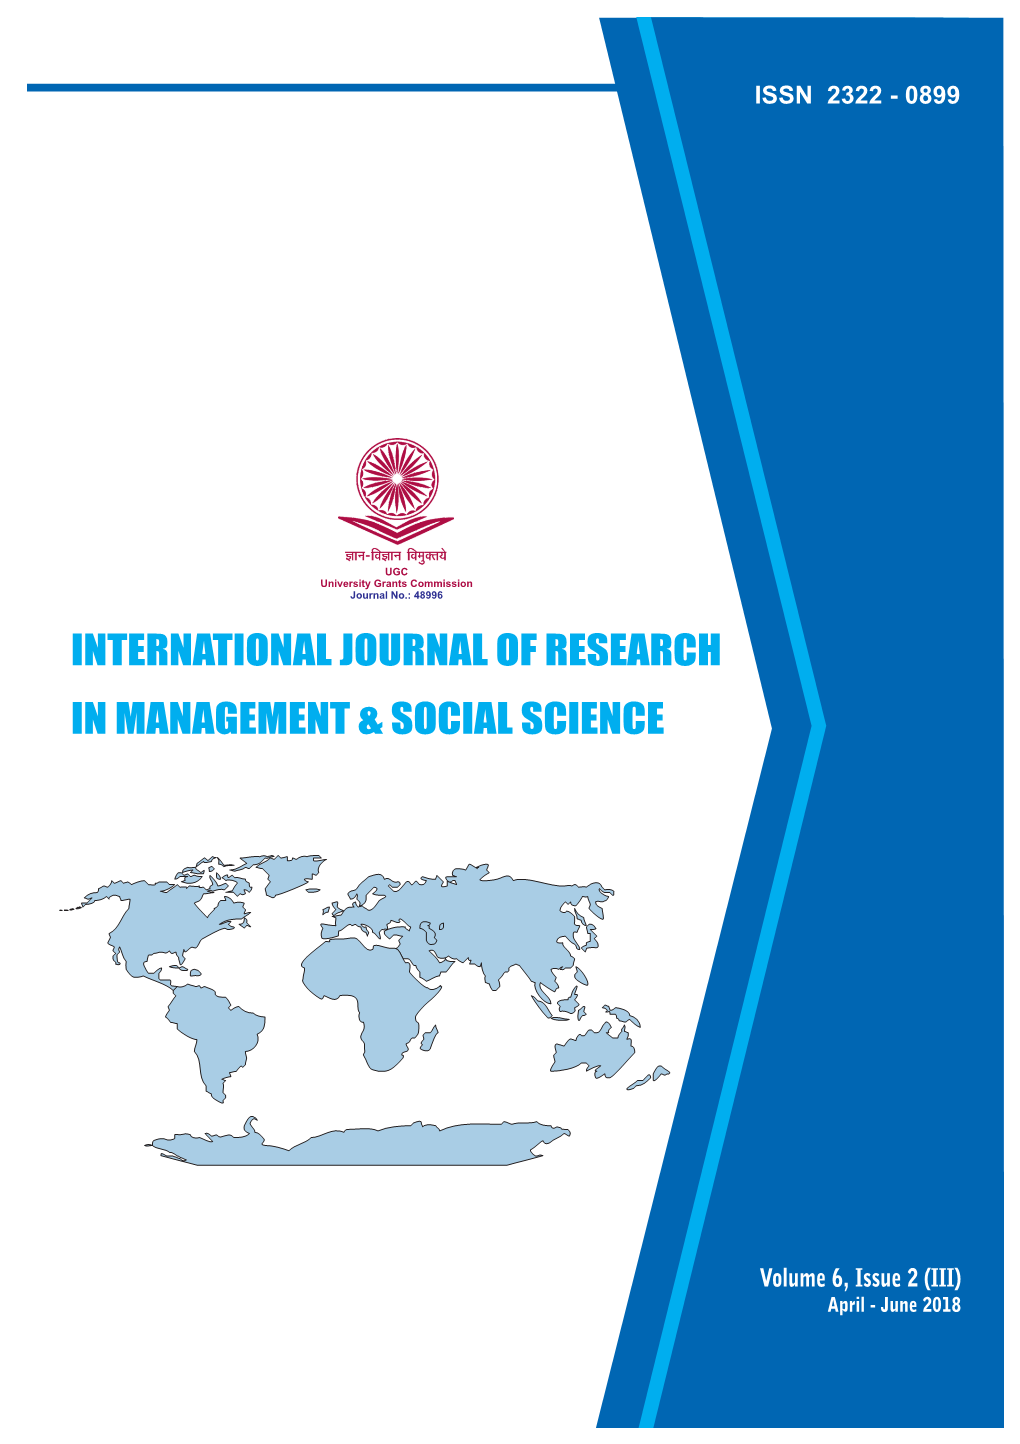 Volume 6, Issue 2 (III) April - June 2018 International Journal of Research in Management & Social Science